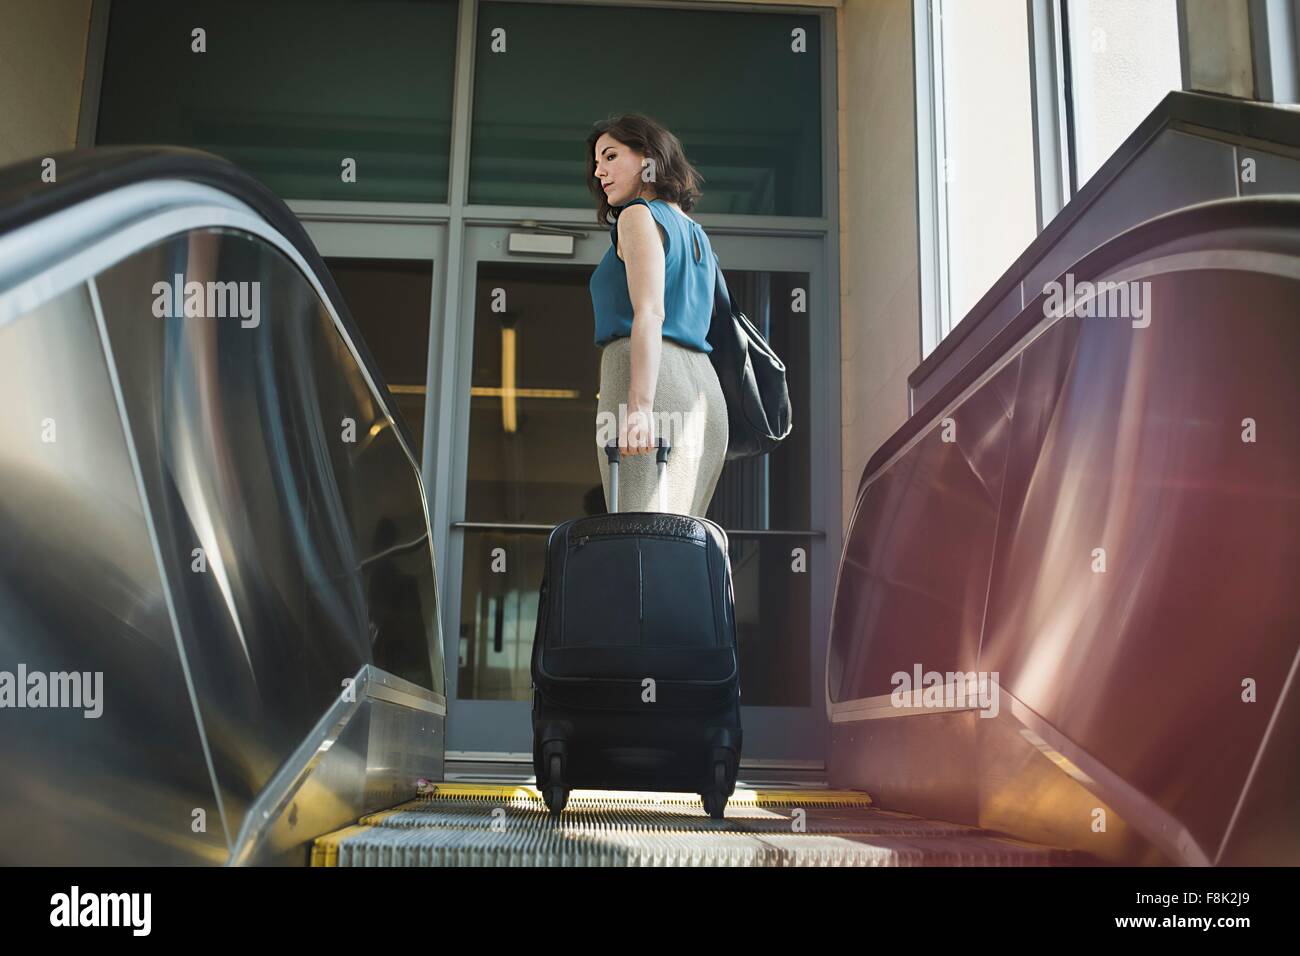 Mid adult woman using escalator, holding wheeled suitcase, rear view Stock Photo